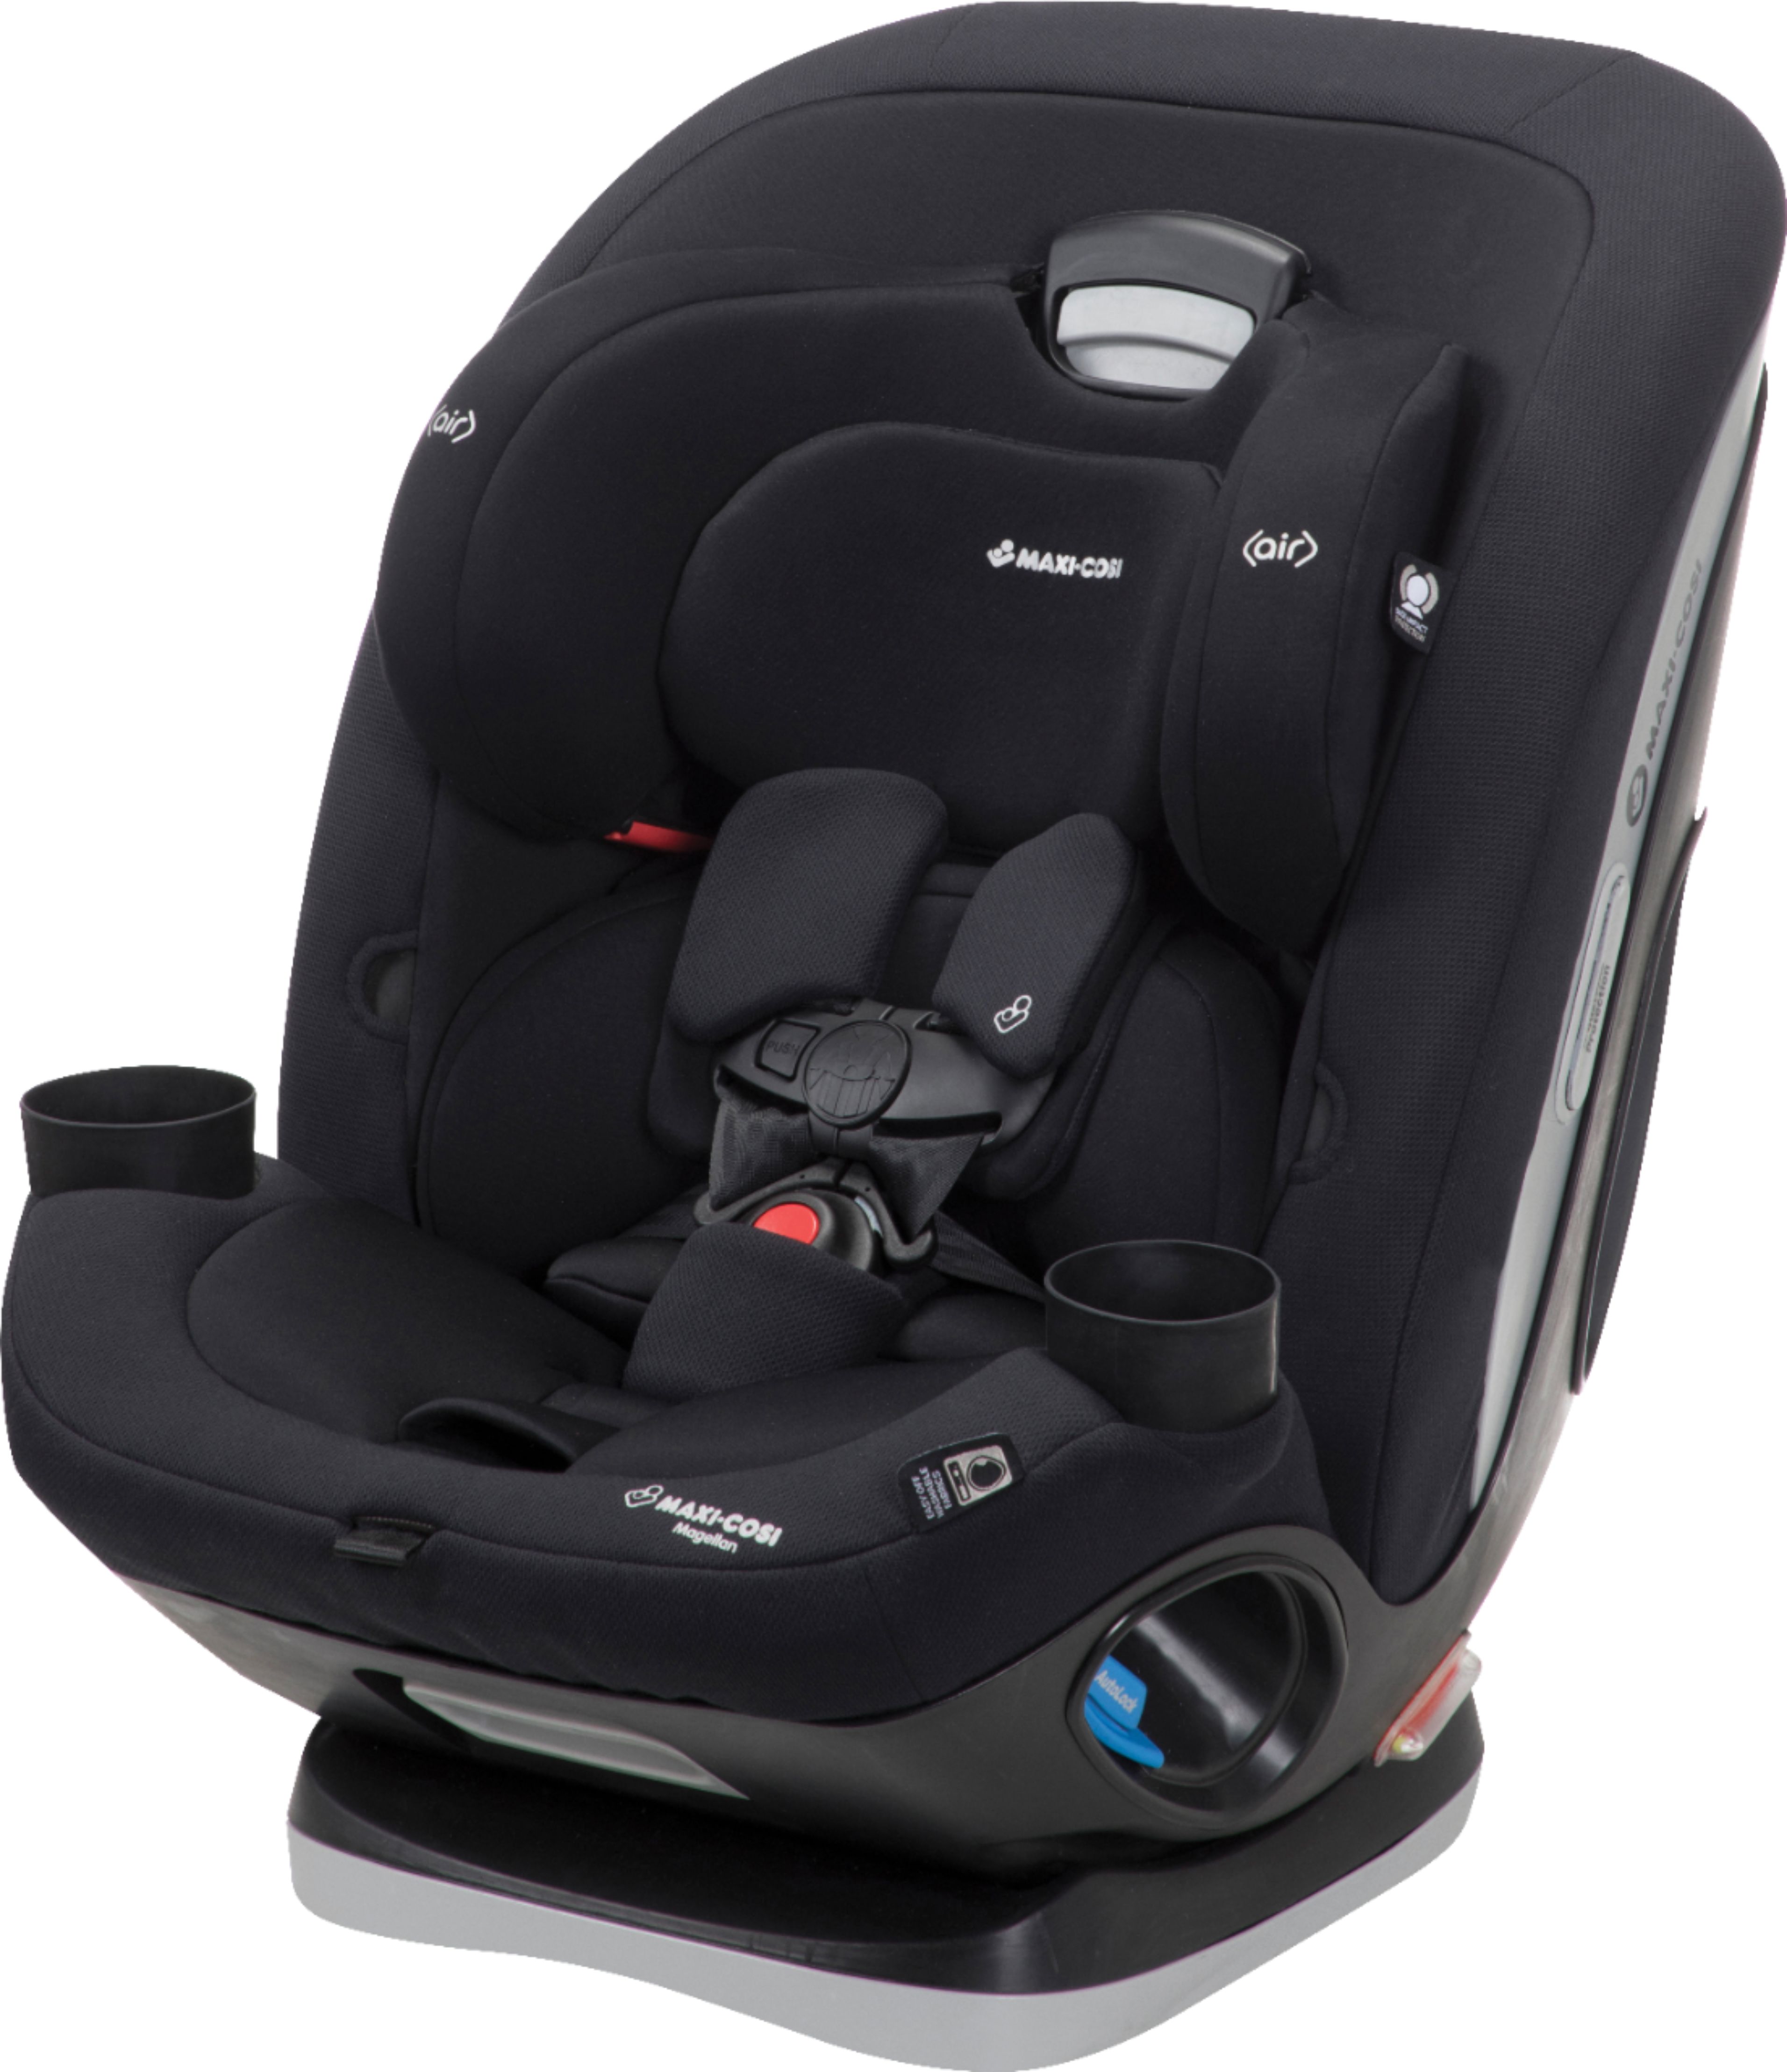 Left View: Maxi-Cosi Magellan All-in-One Convertible Car Seat with 5 modes, Night Black